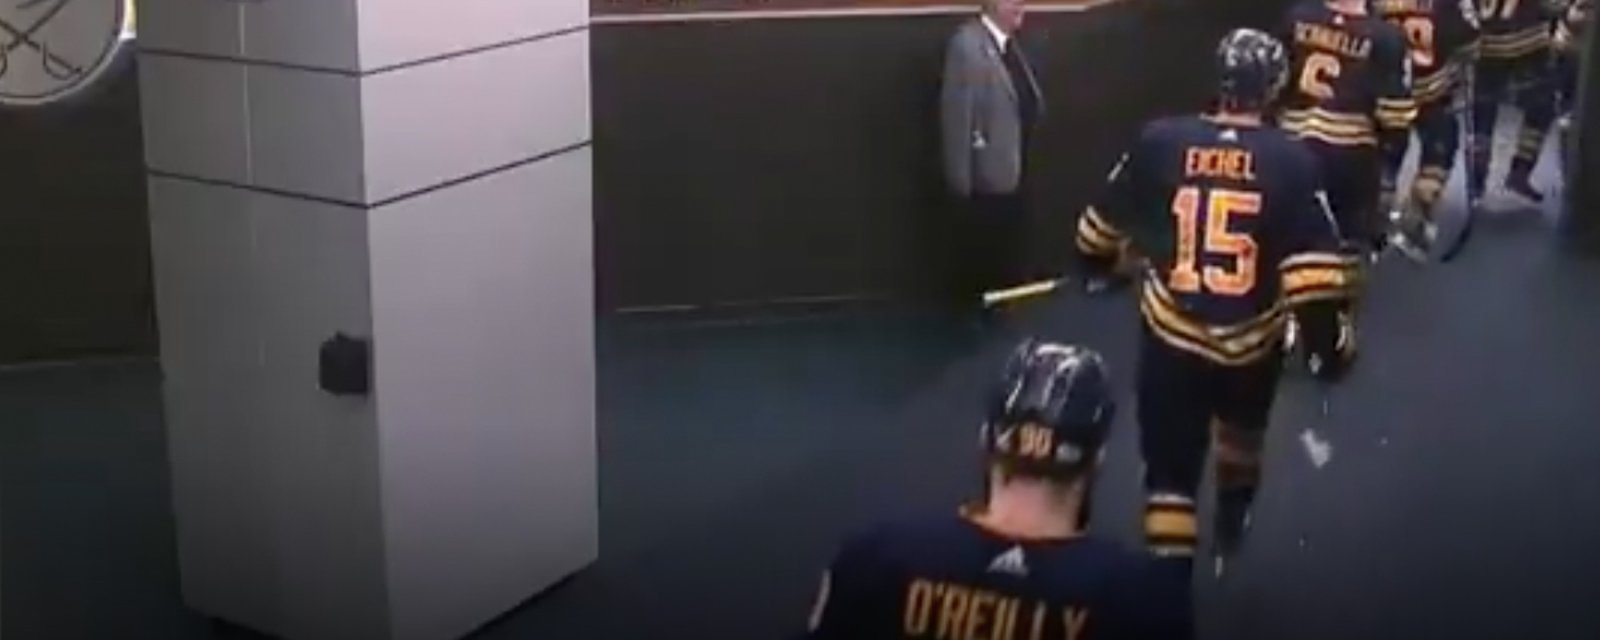 Video: Eichel unleashes his fury after loss to Sharks